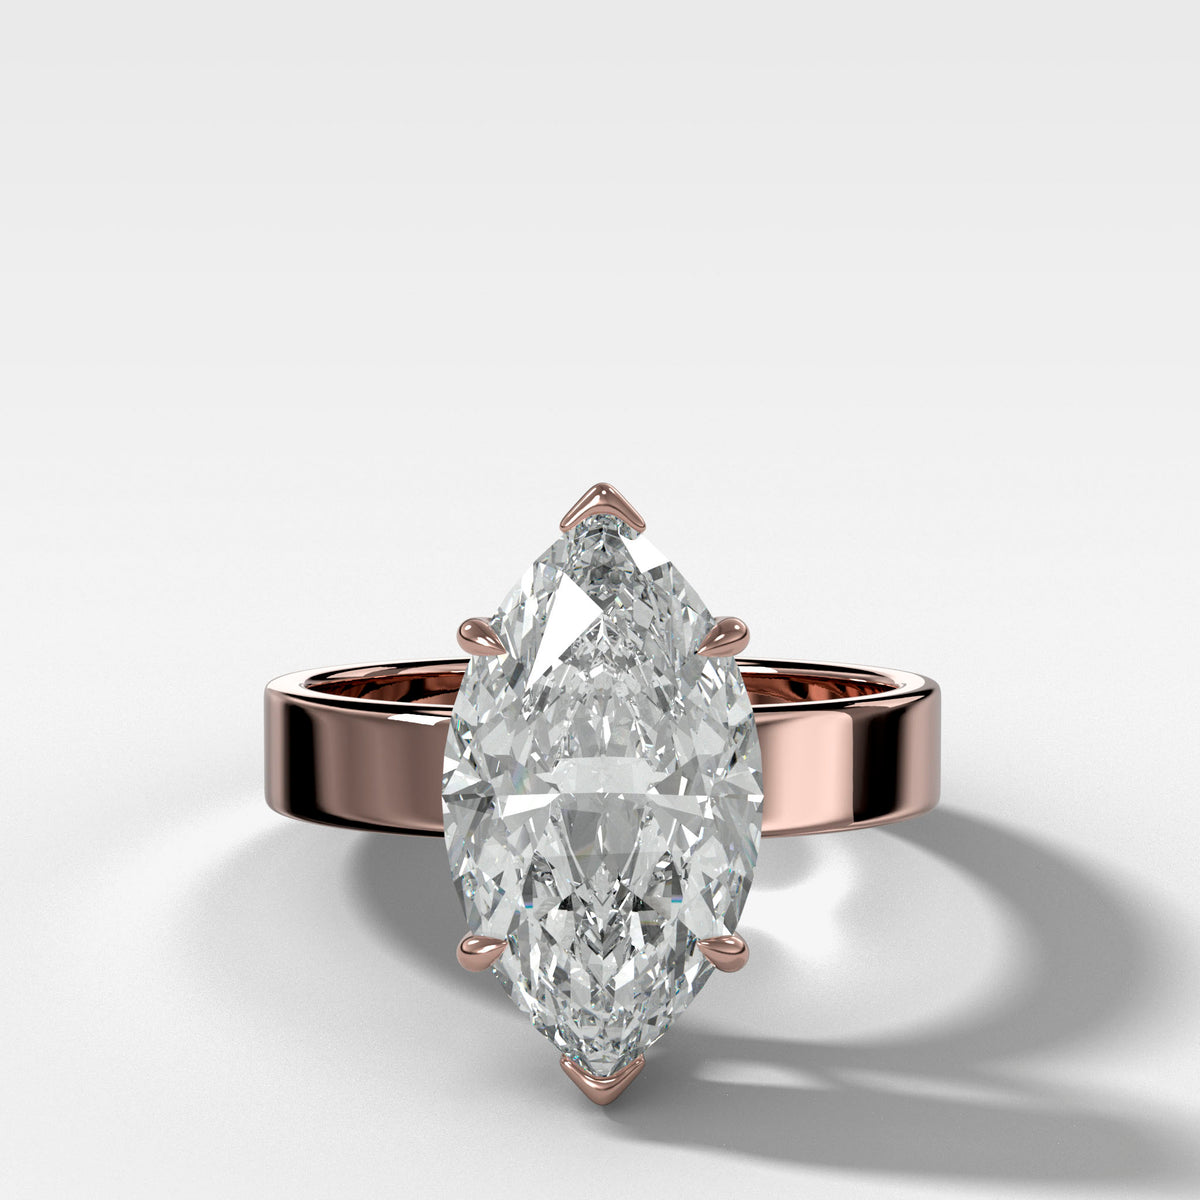 Finest Solitaire Engagement Ring With Marquise Cut Diamond